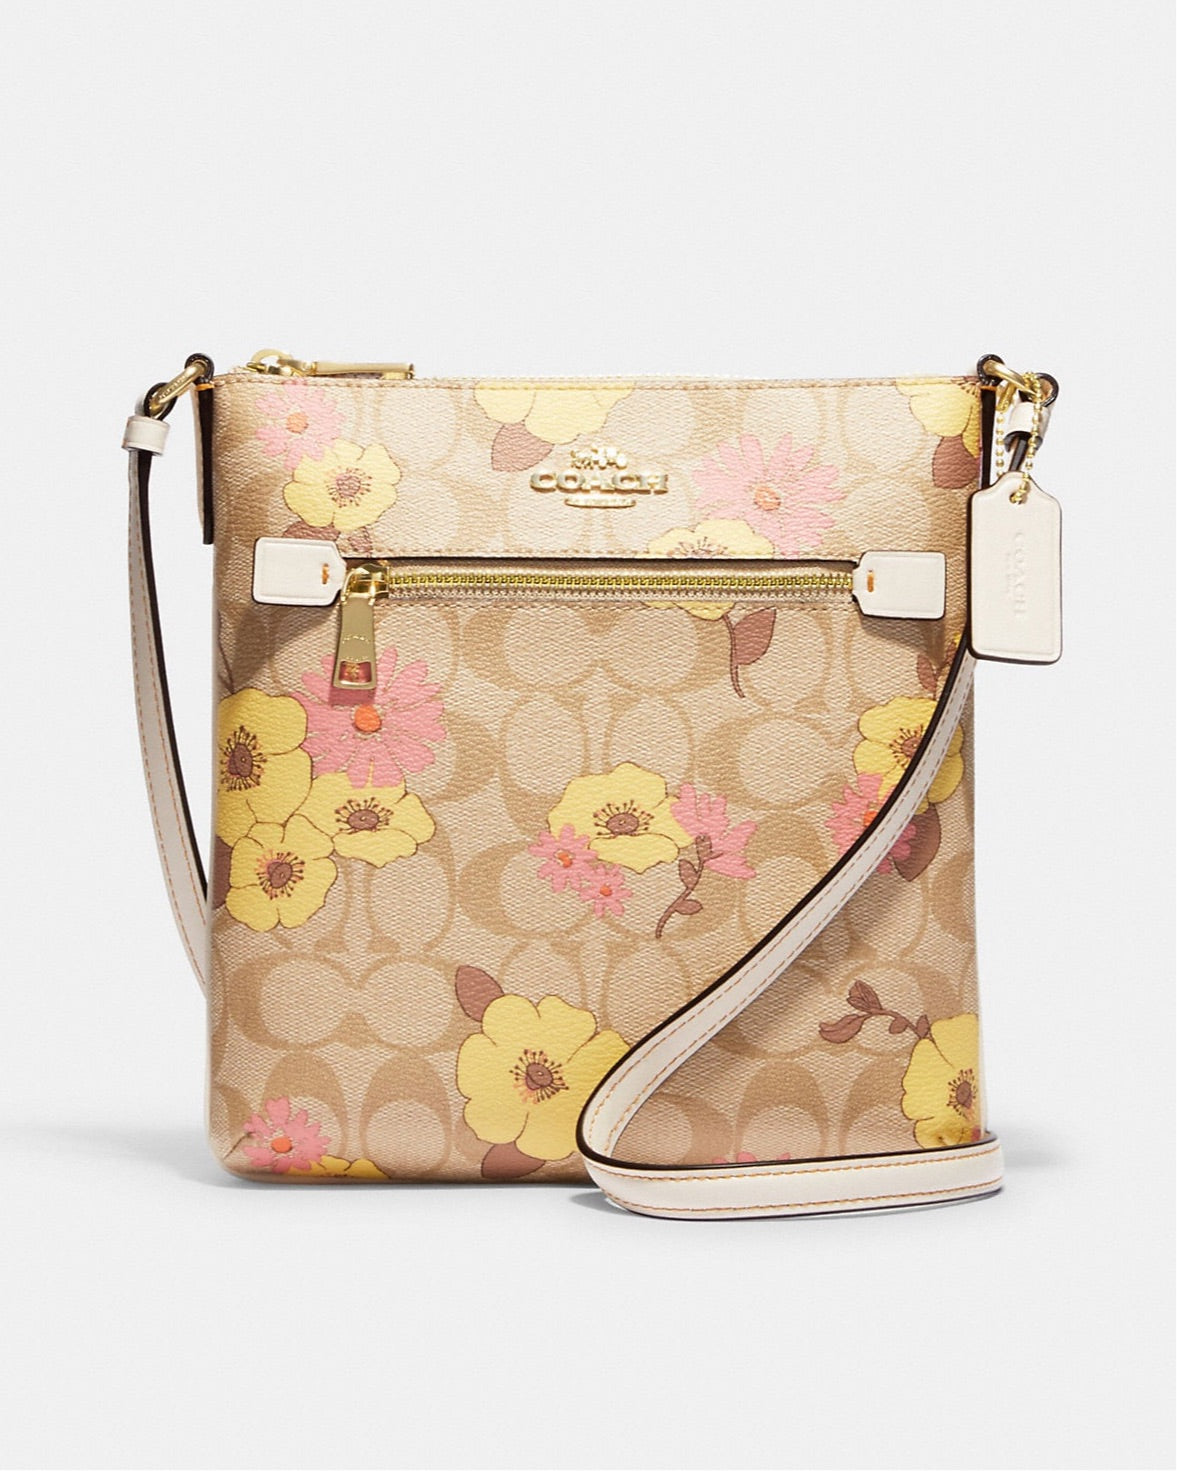 NWT COACH Mini Rowan File Bag In Signature Canvas With Floral Cluster Print